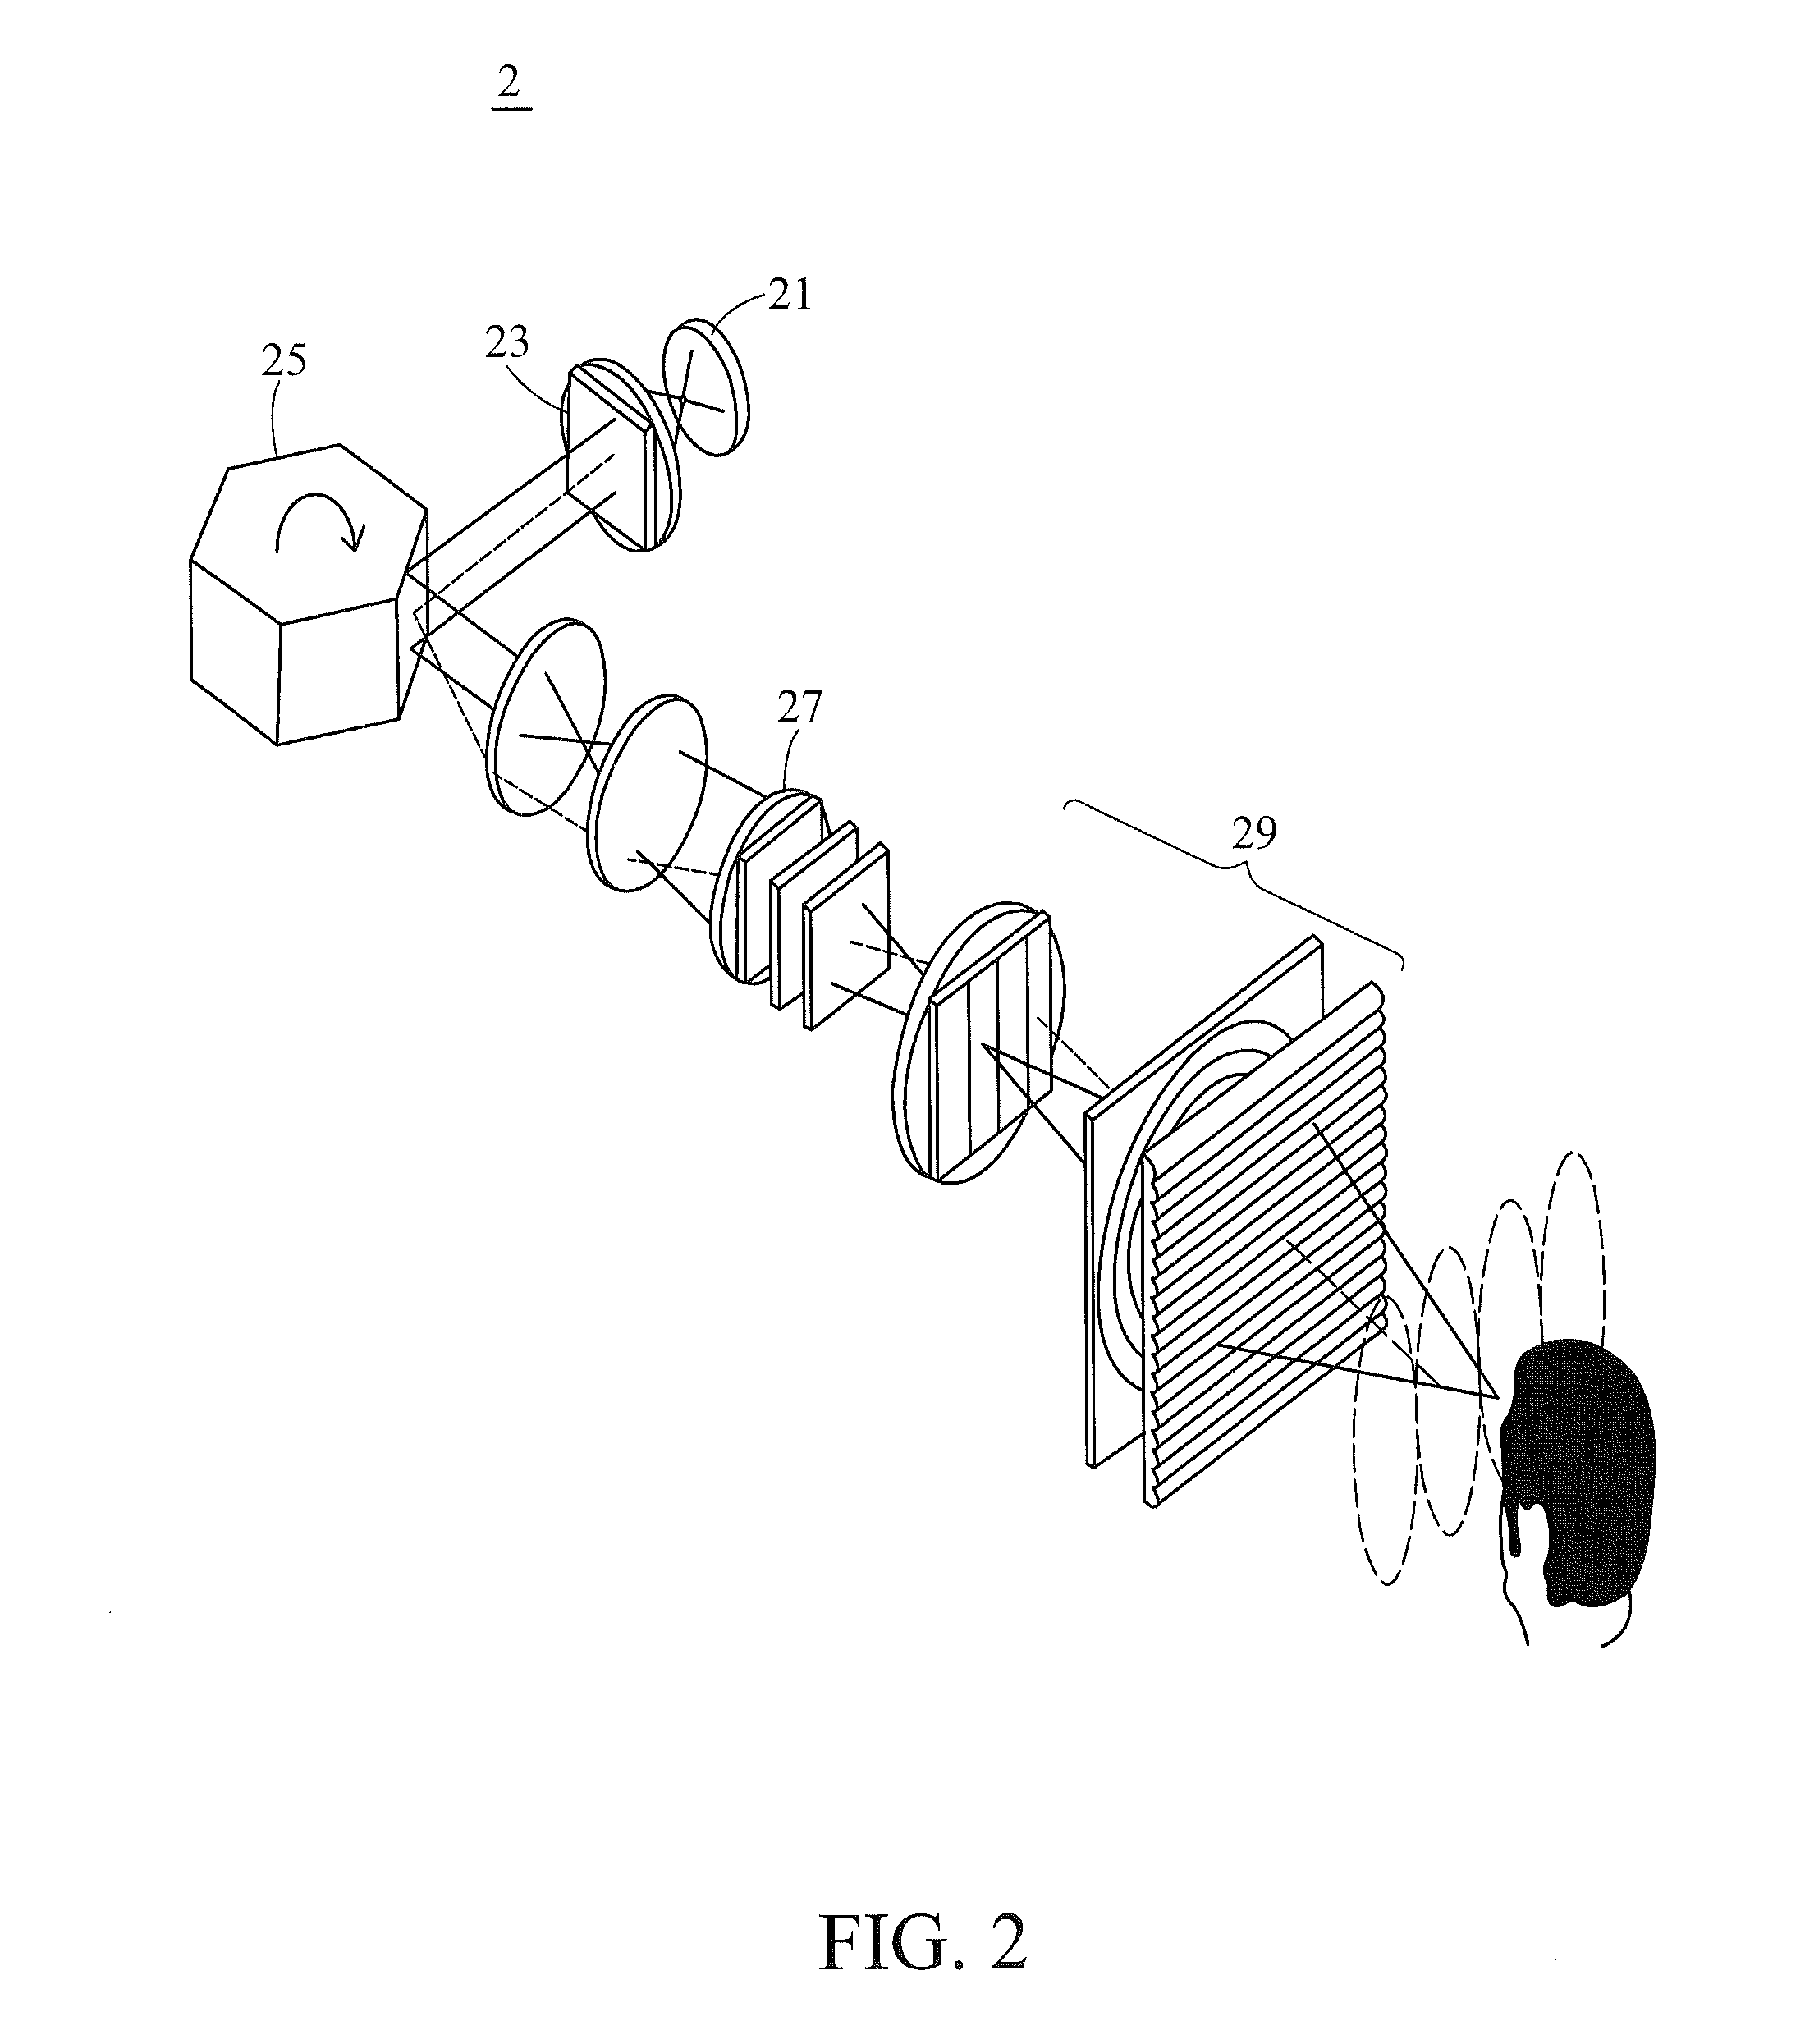 Projection apparatus for providing multiple viewing angle images